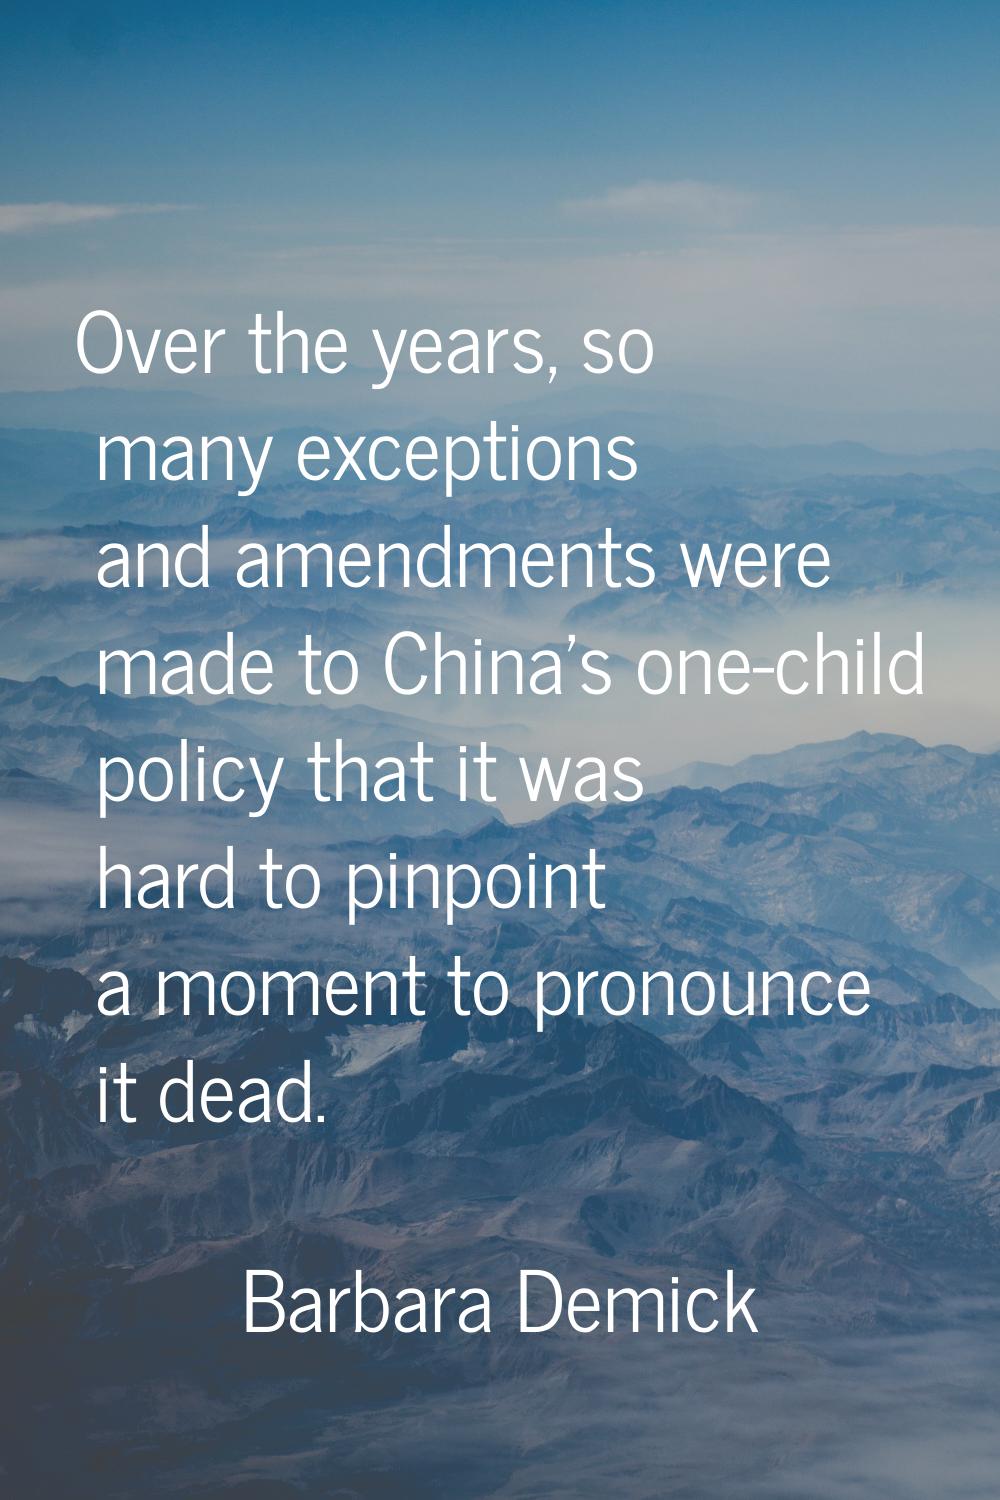 Over the years, so many exceptions and amendments were made to China's one-child policy that it was